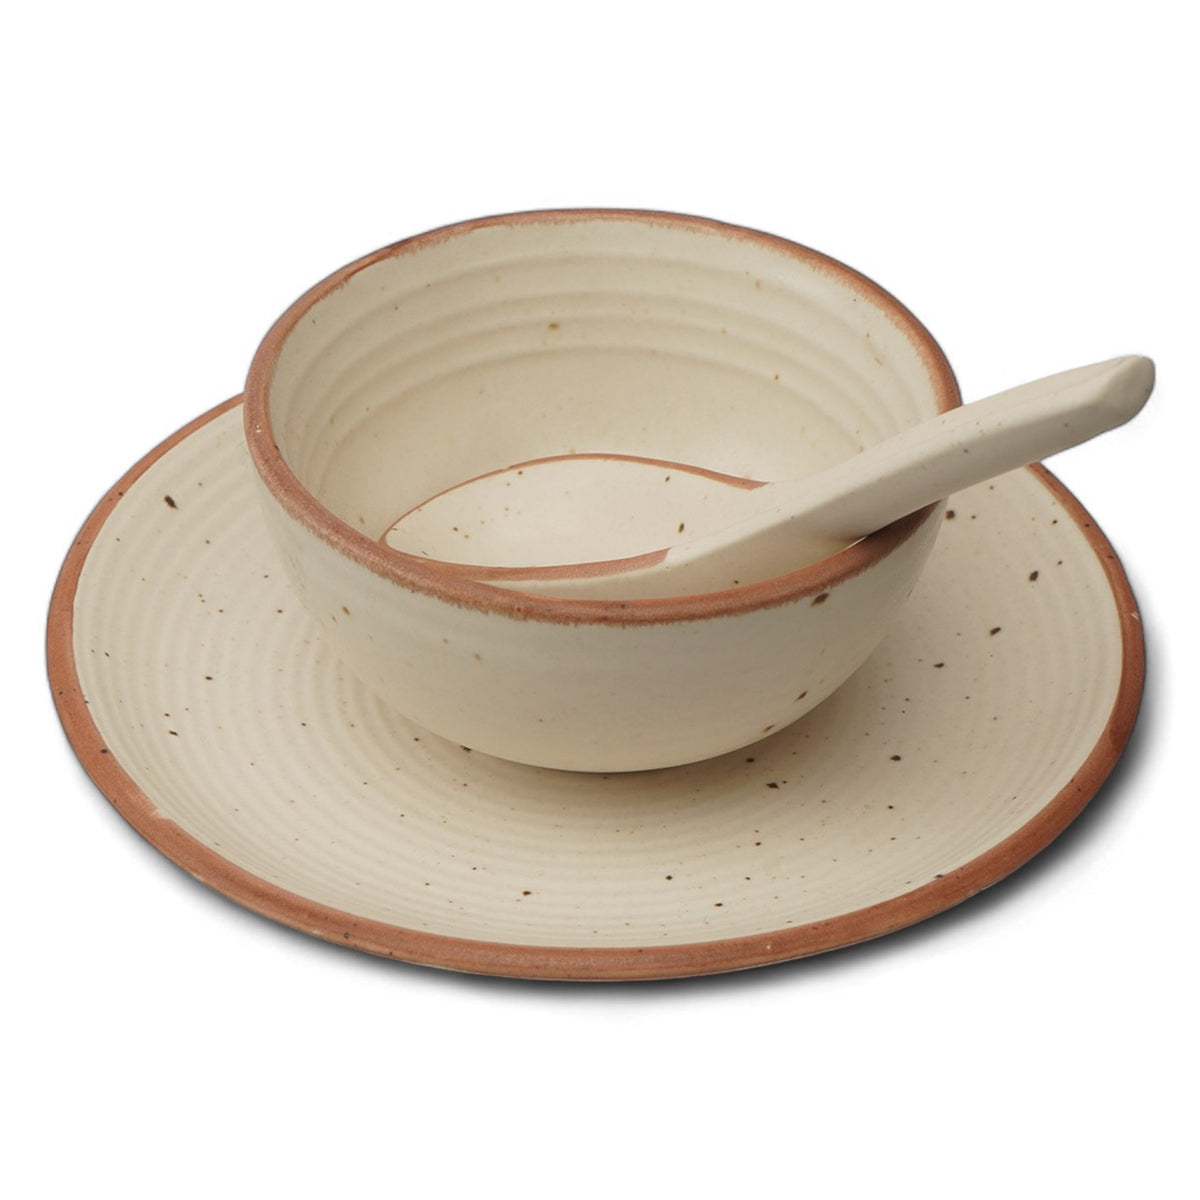 Sandy Surprise: Ivory Bowl with Speckled Splendor and a Dash of Desert Delight